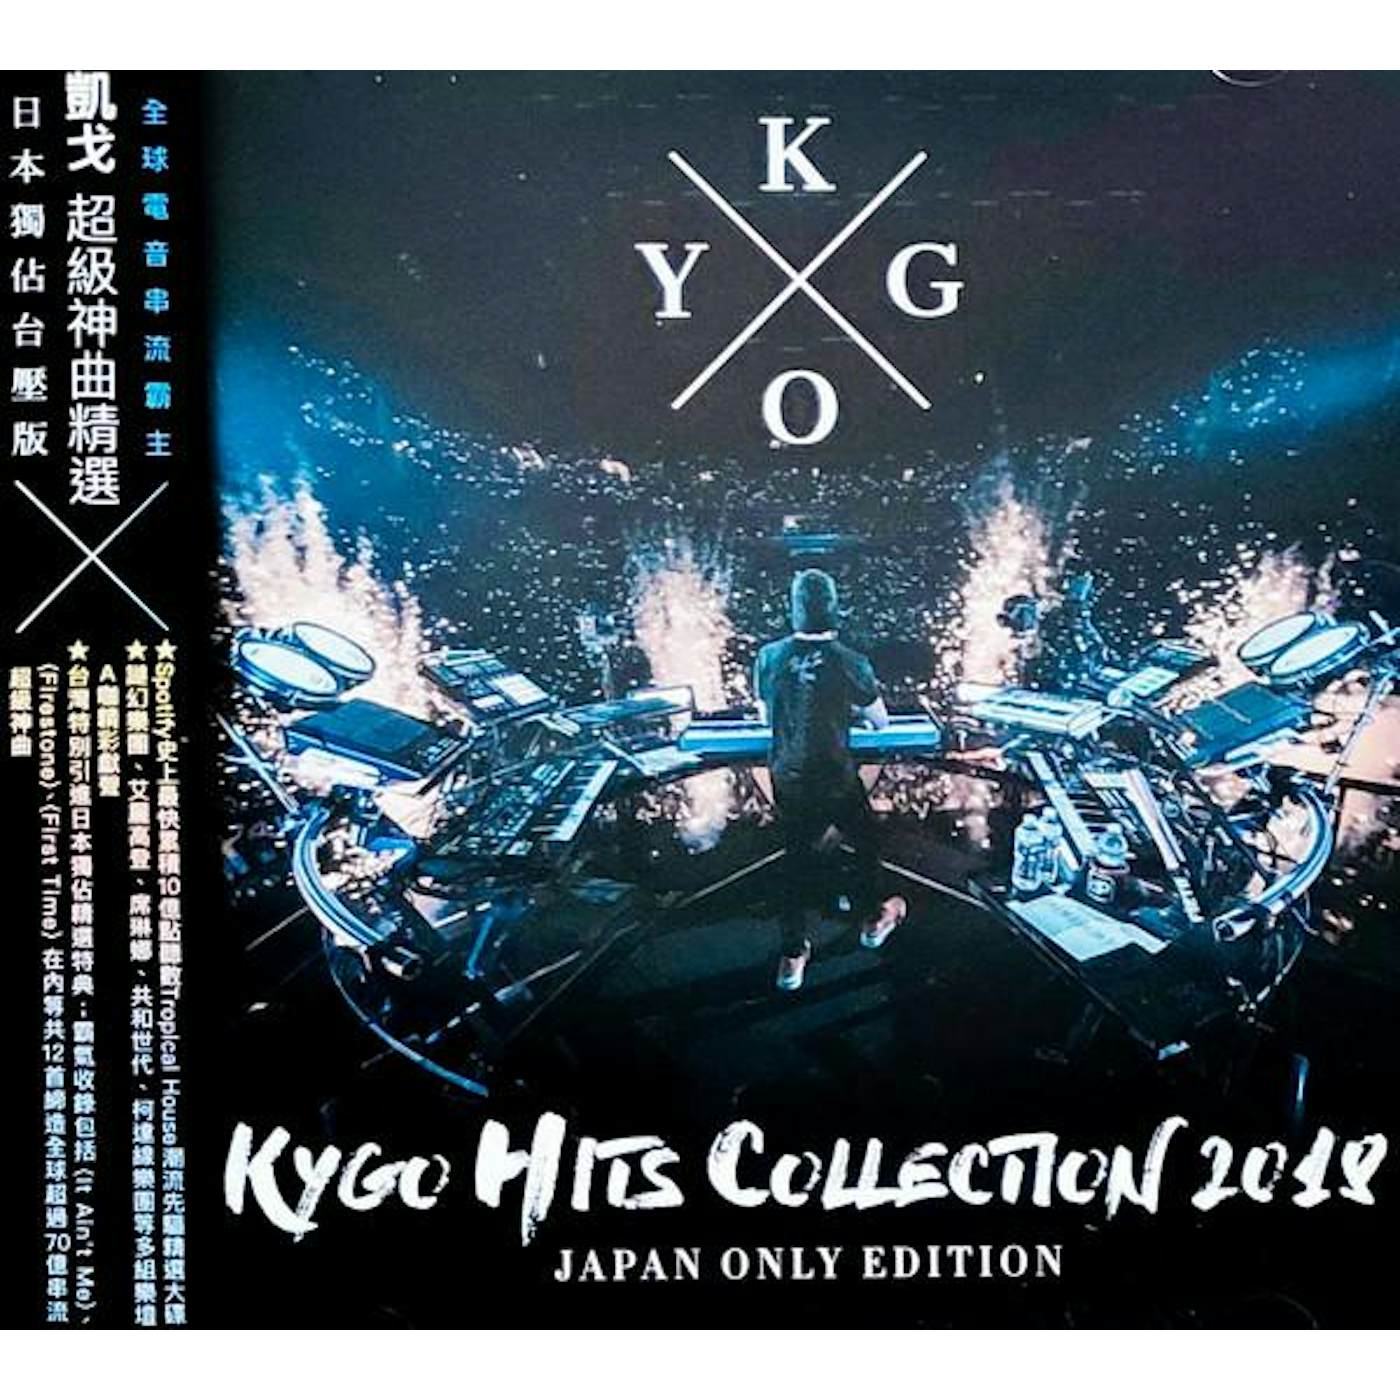 KYGO HITS COLLECTION 2018 CD